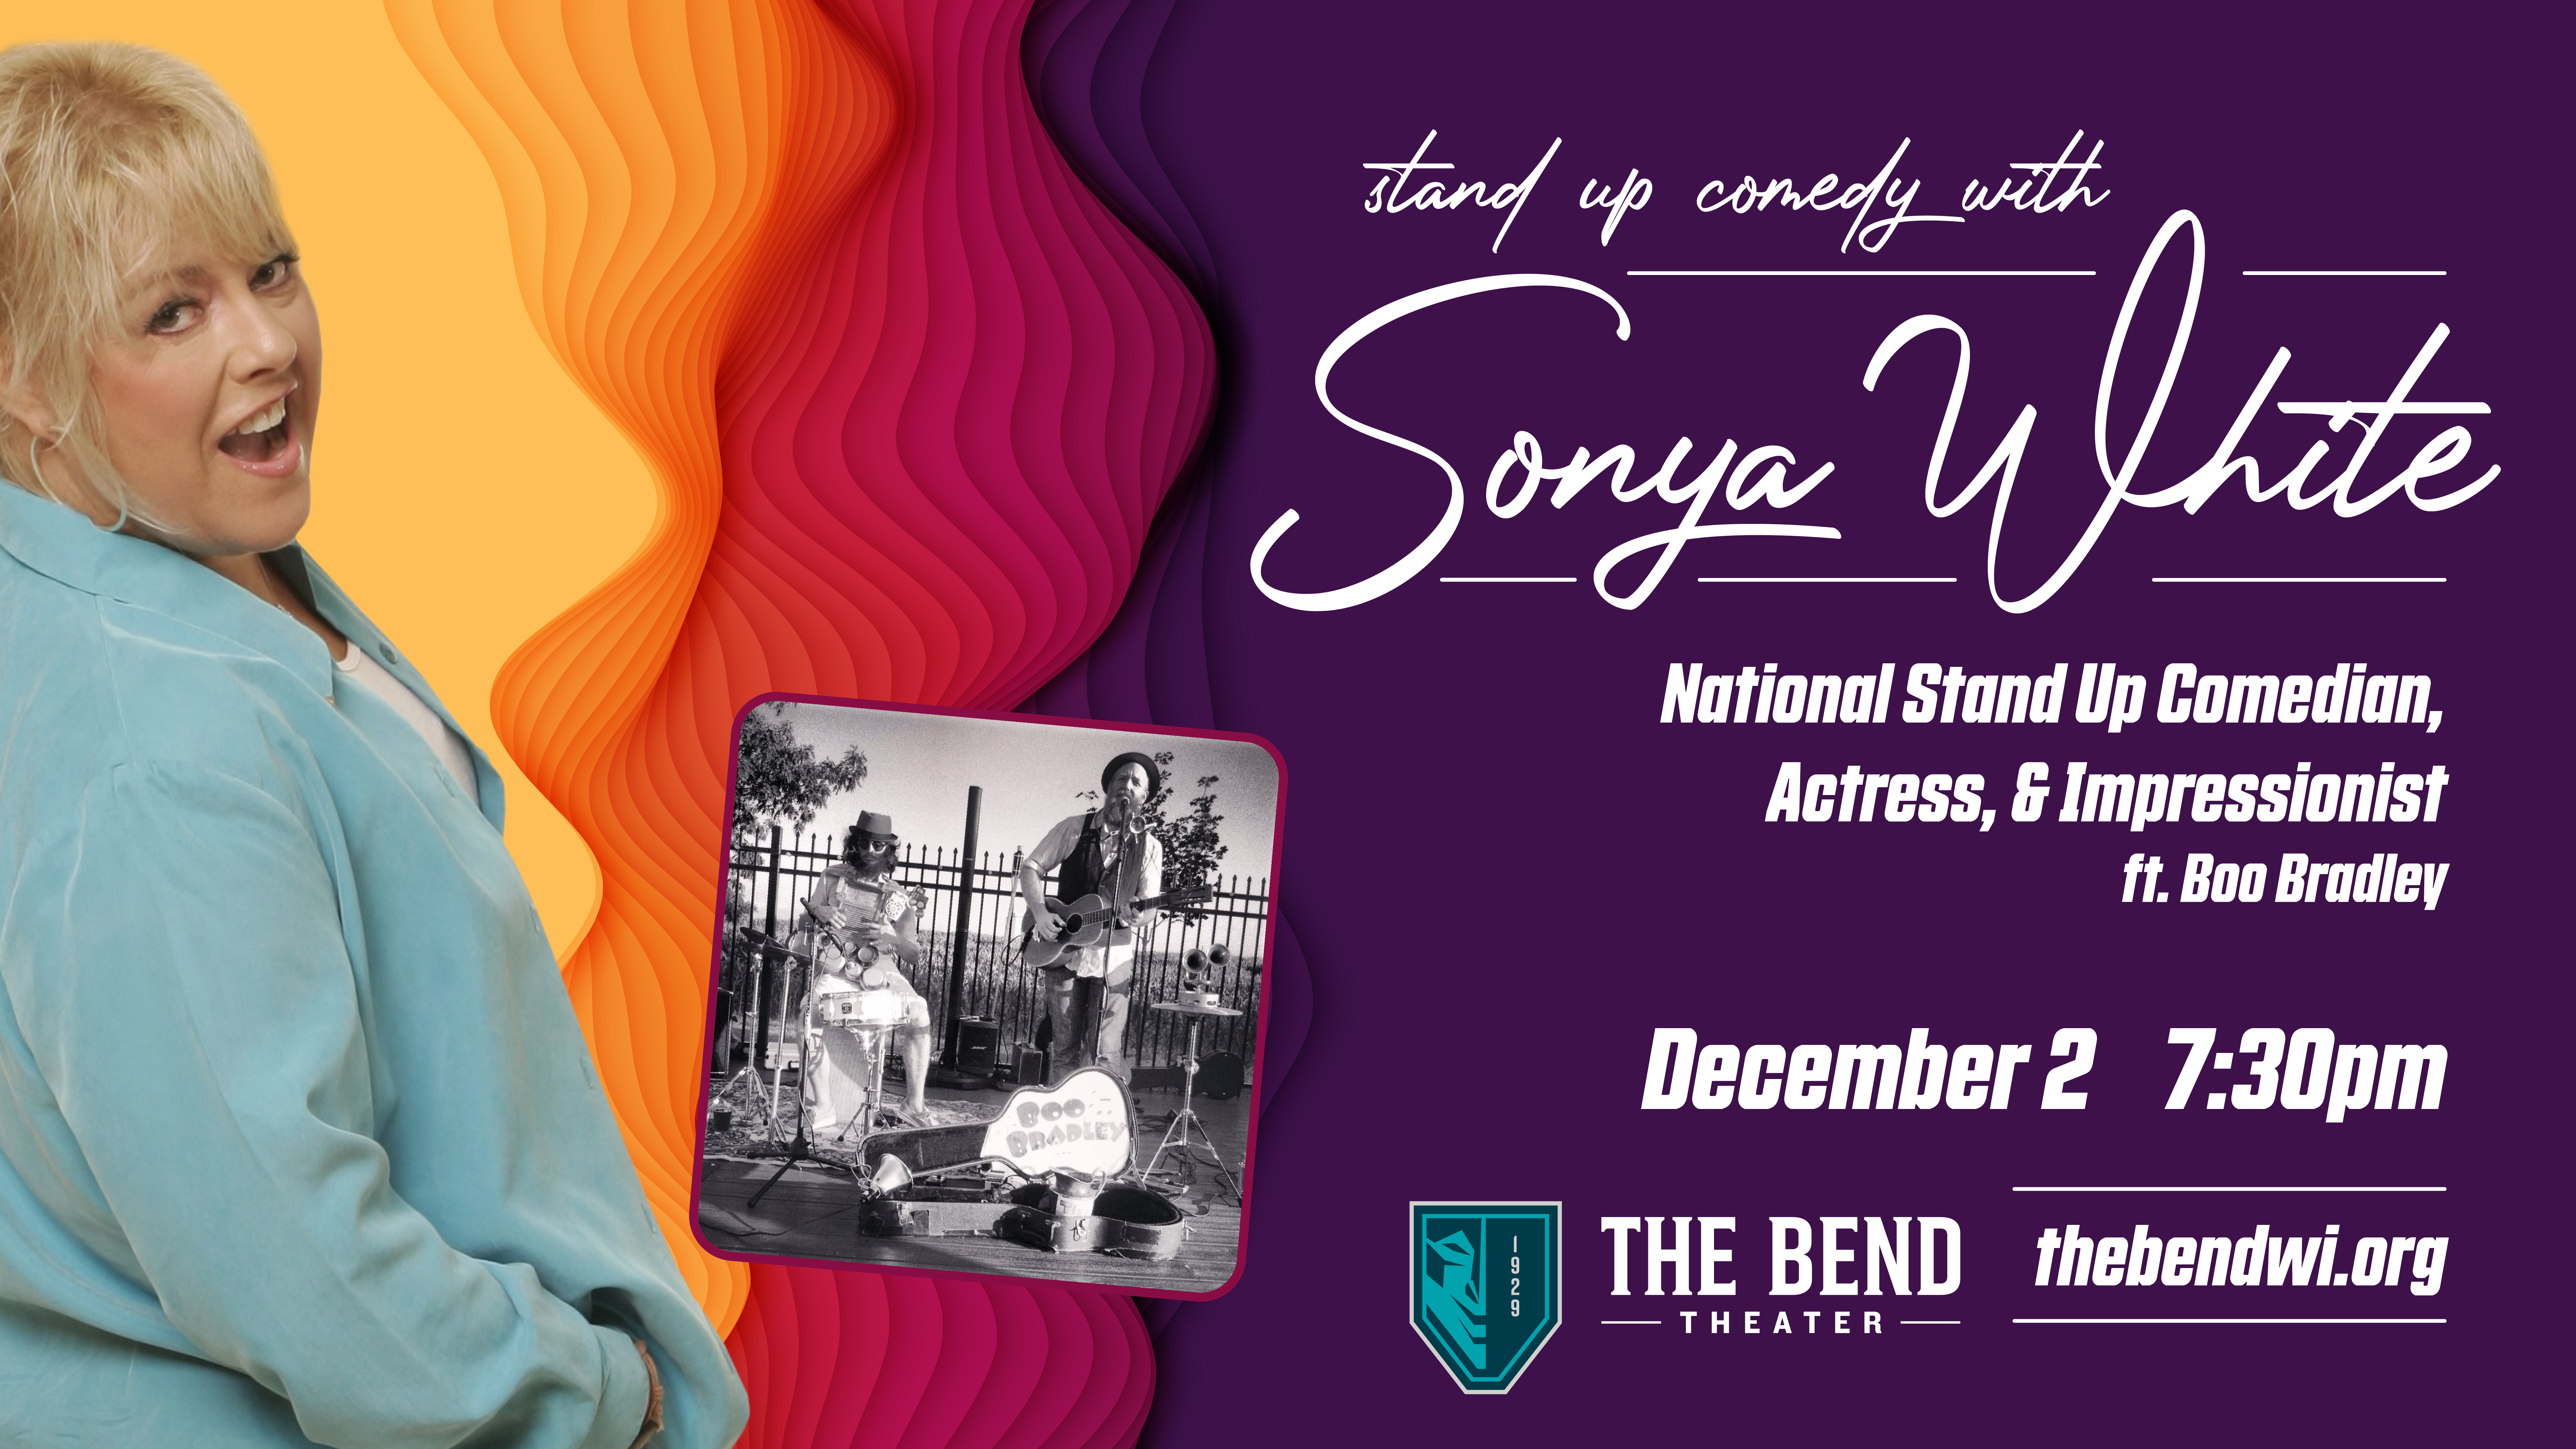 Comedy at The Bend Theater with Sonya White ft. Boo Bradley